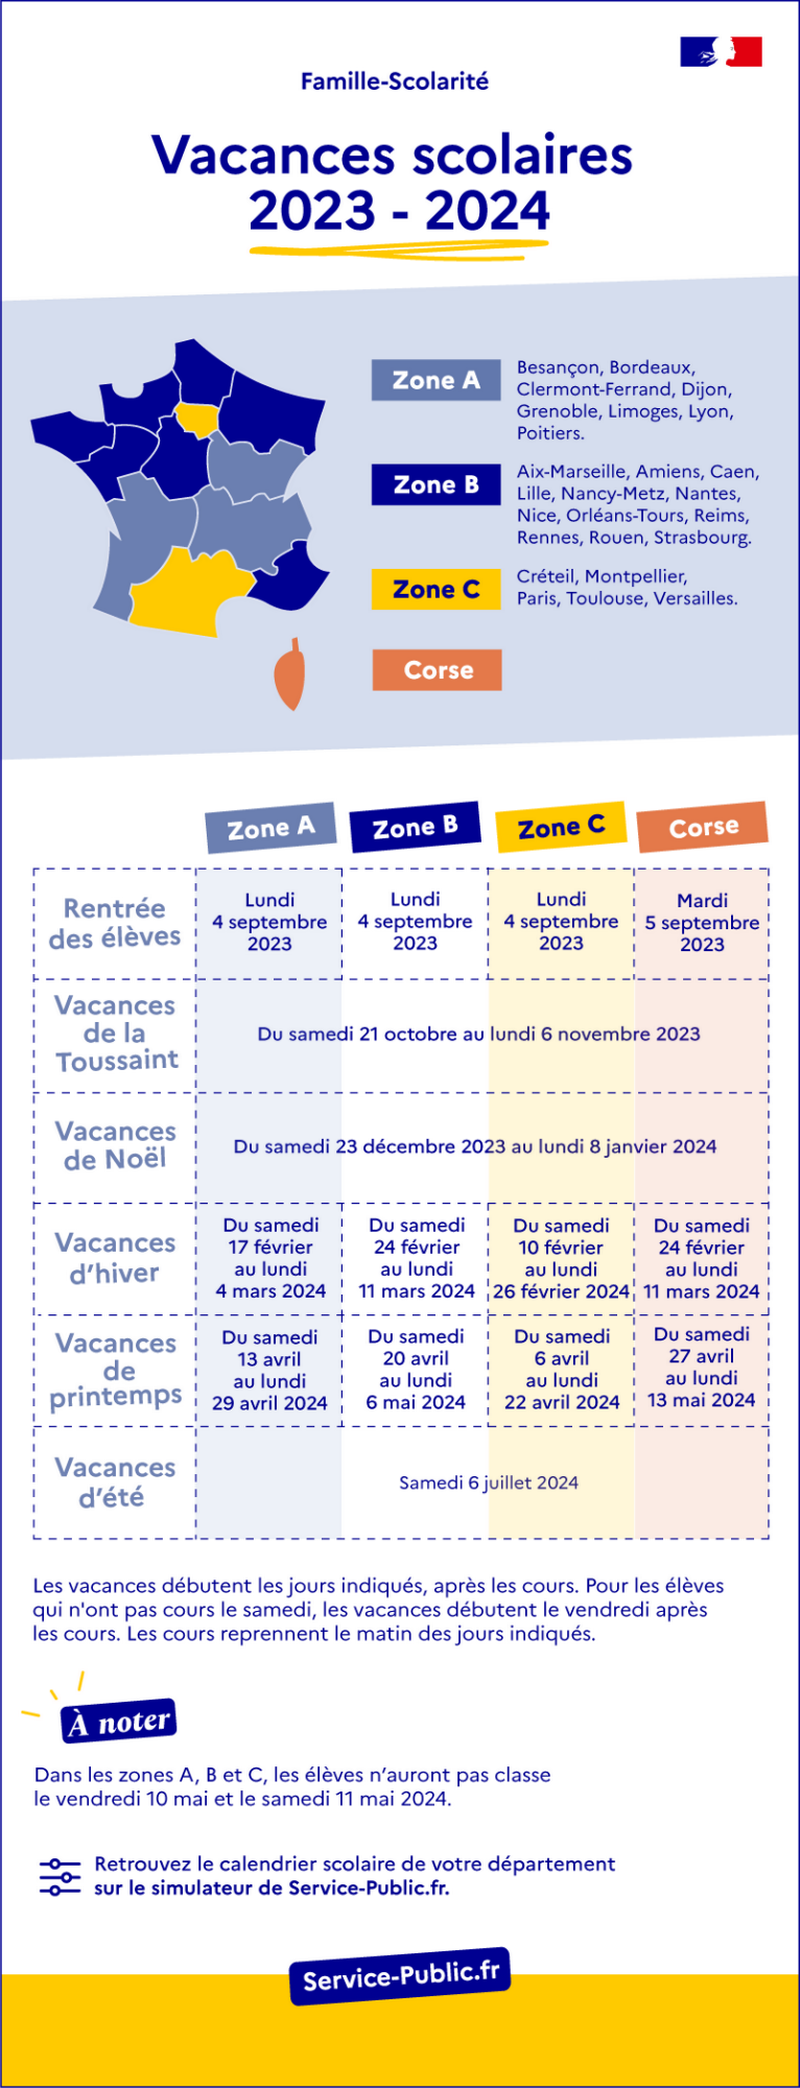 OM : Le calendrier complet 2022/2023 !